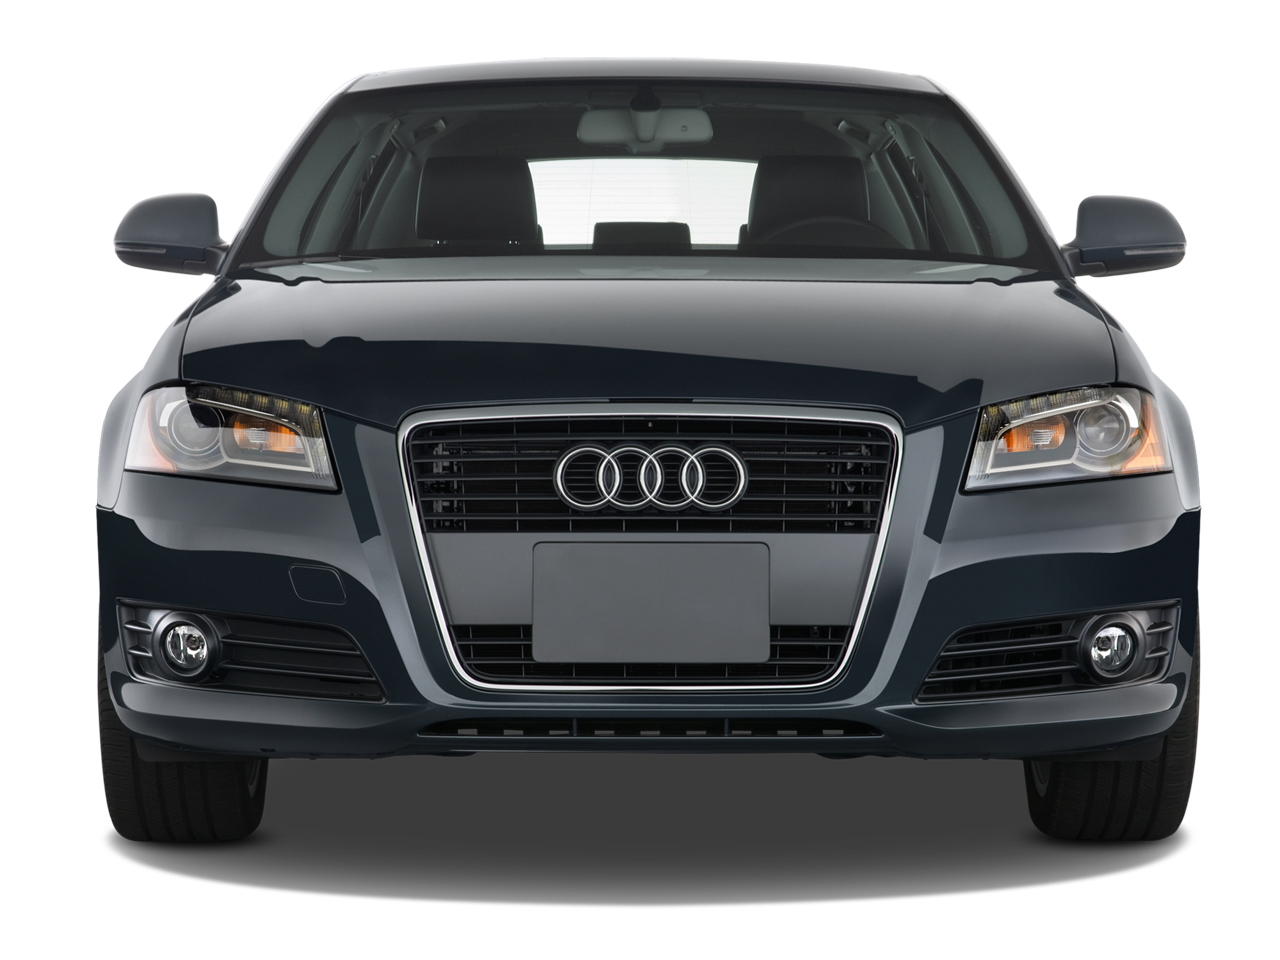 Audi A3 Sportback (2004 - 2012) used car review, Car review